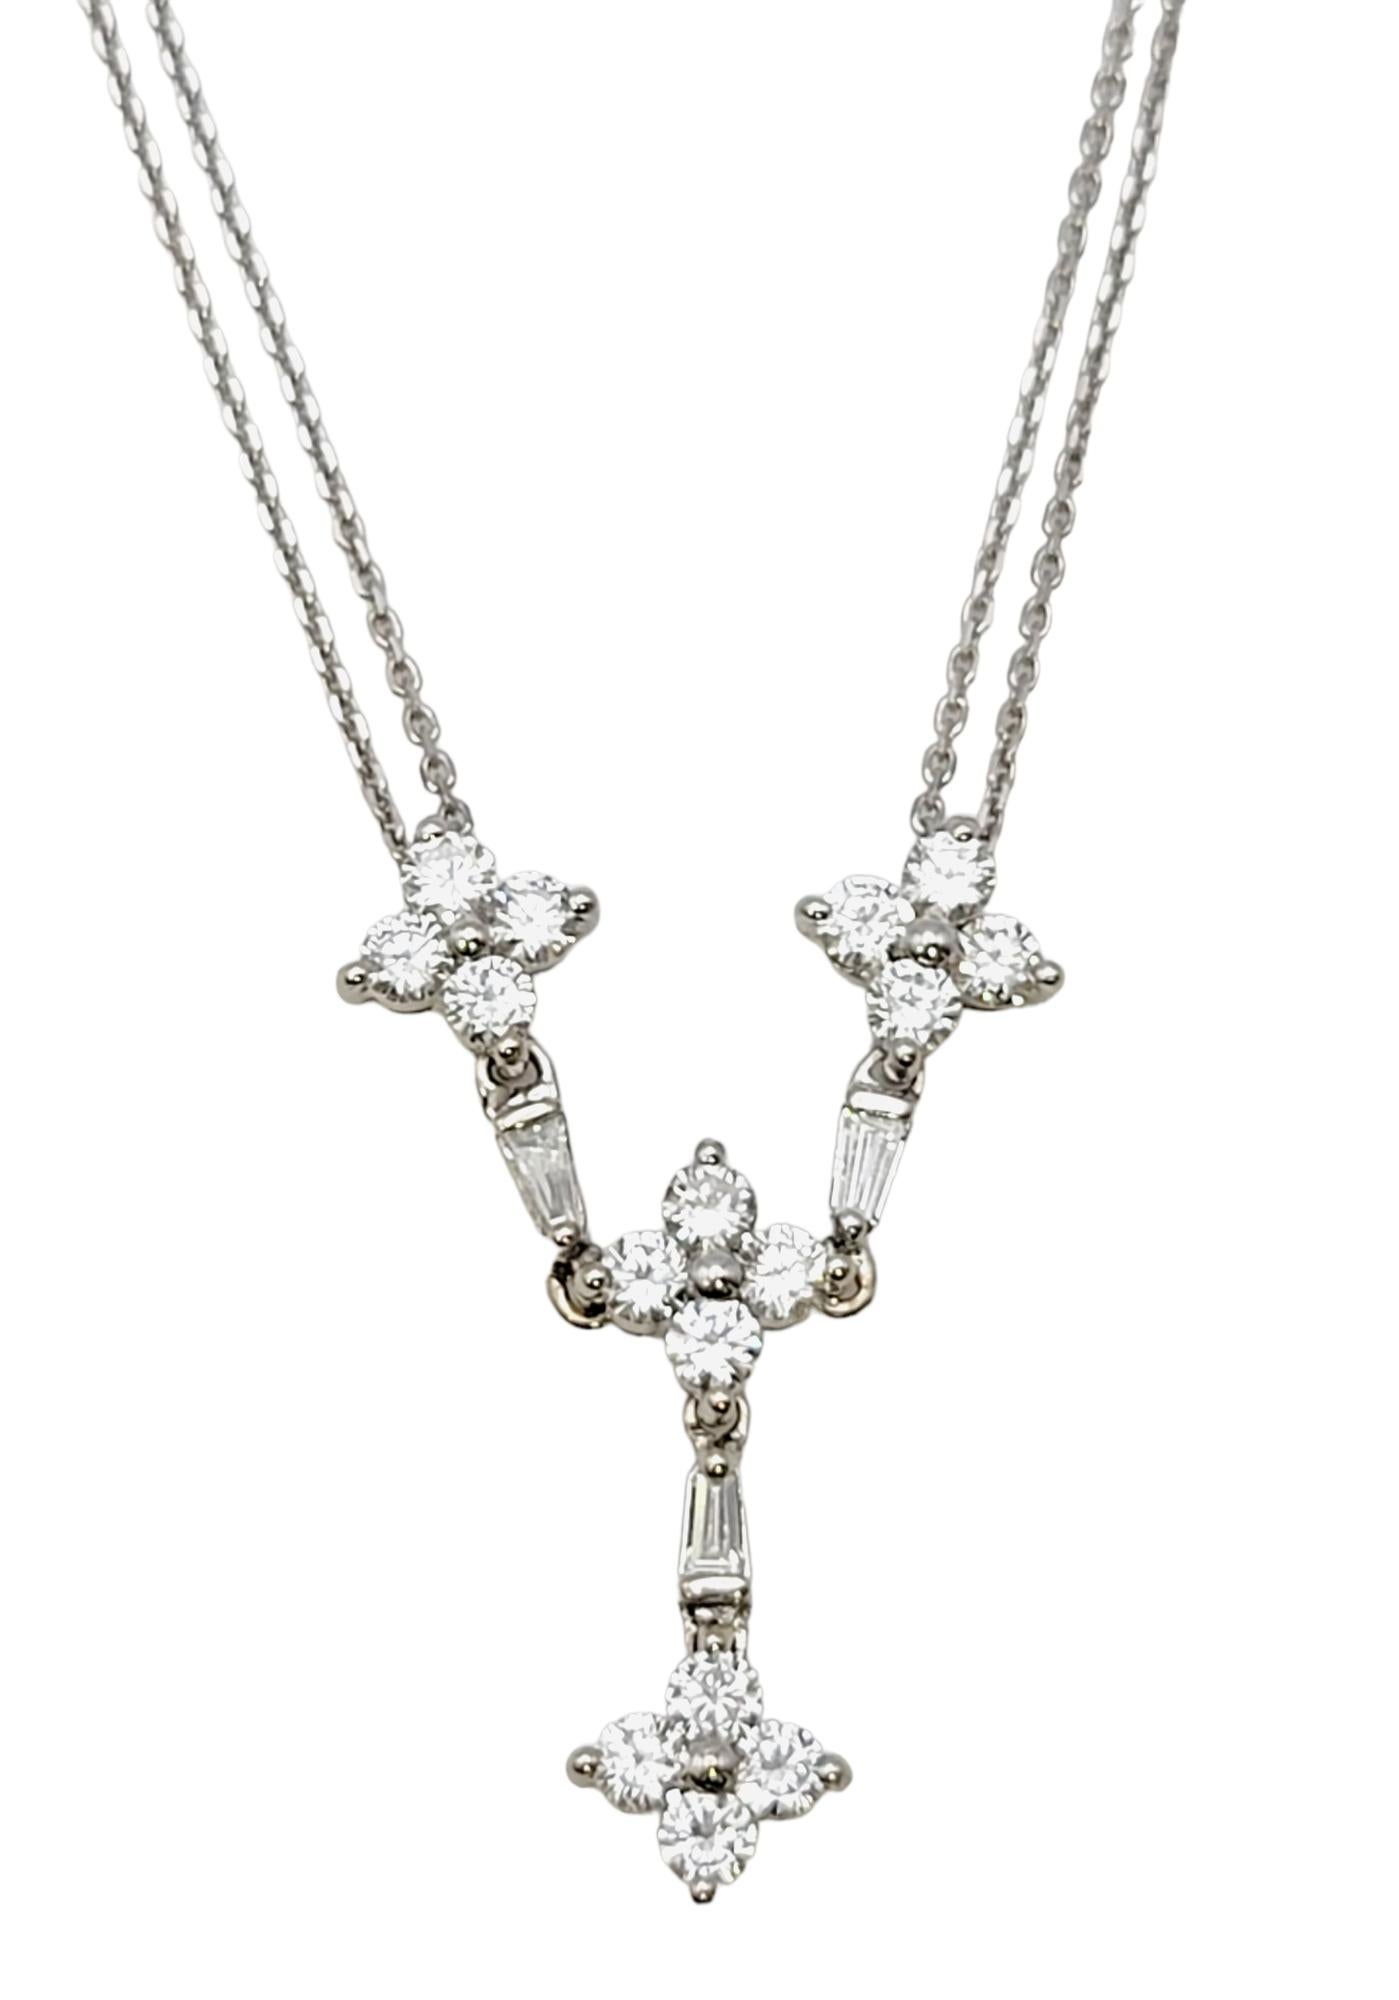 This delicate double chain diamond drop necklace is absolutely stunning. Featuring round and baguette shaped glittering natural diamonds and solid 14 karat white gold, this stunning piece offers femineity and elegance in a timeless style. The double